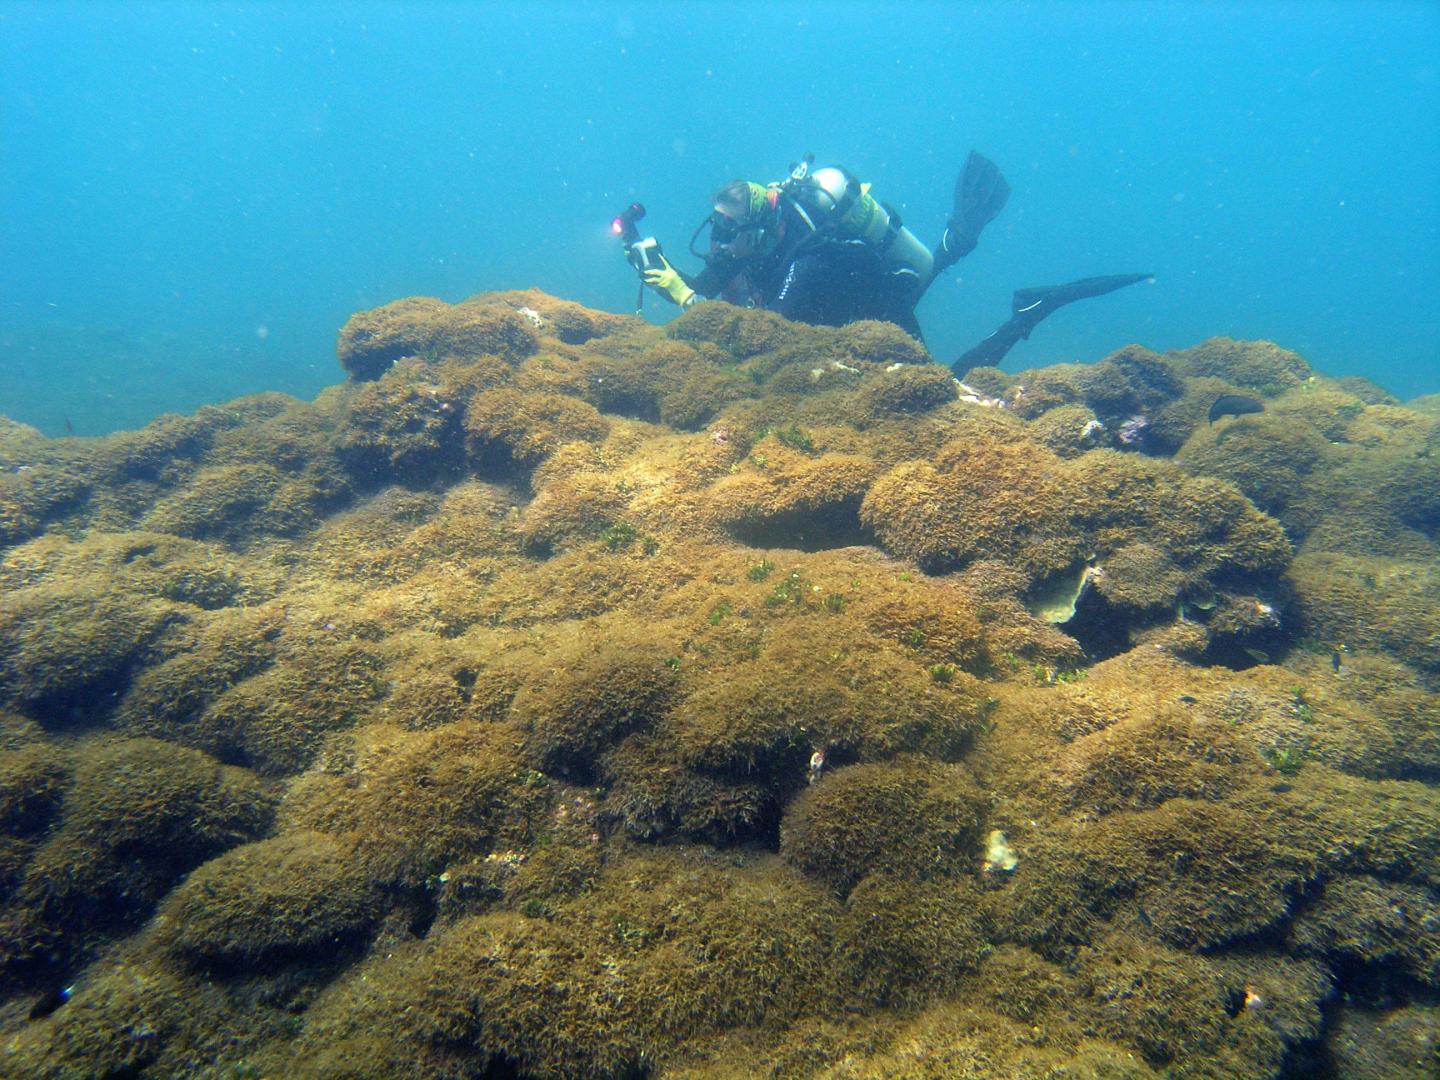 Newly discovered algae species infesting NW Hawaiian waters